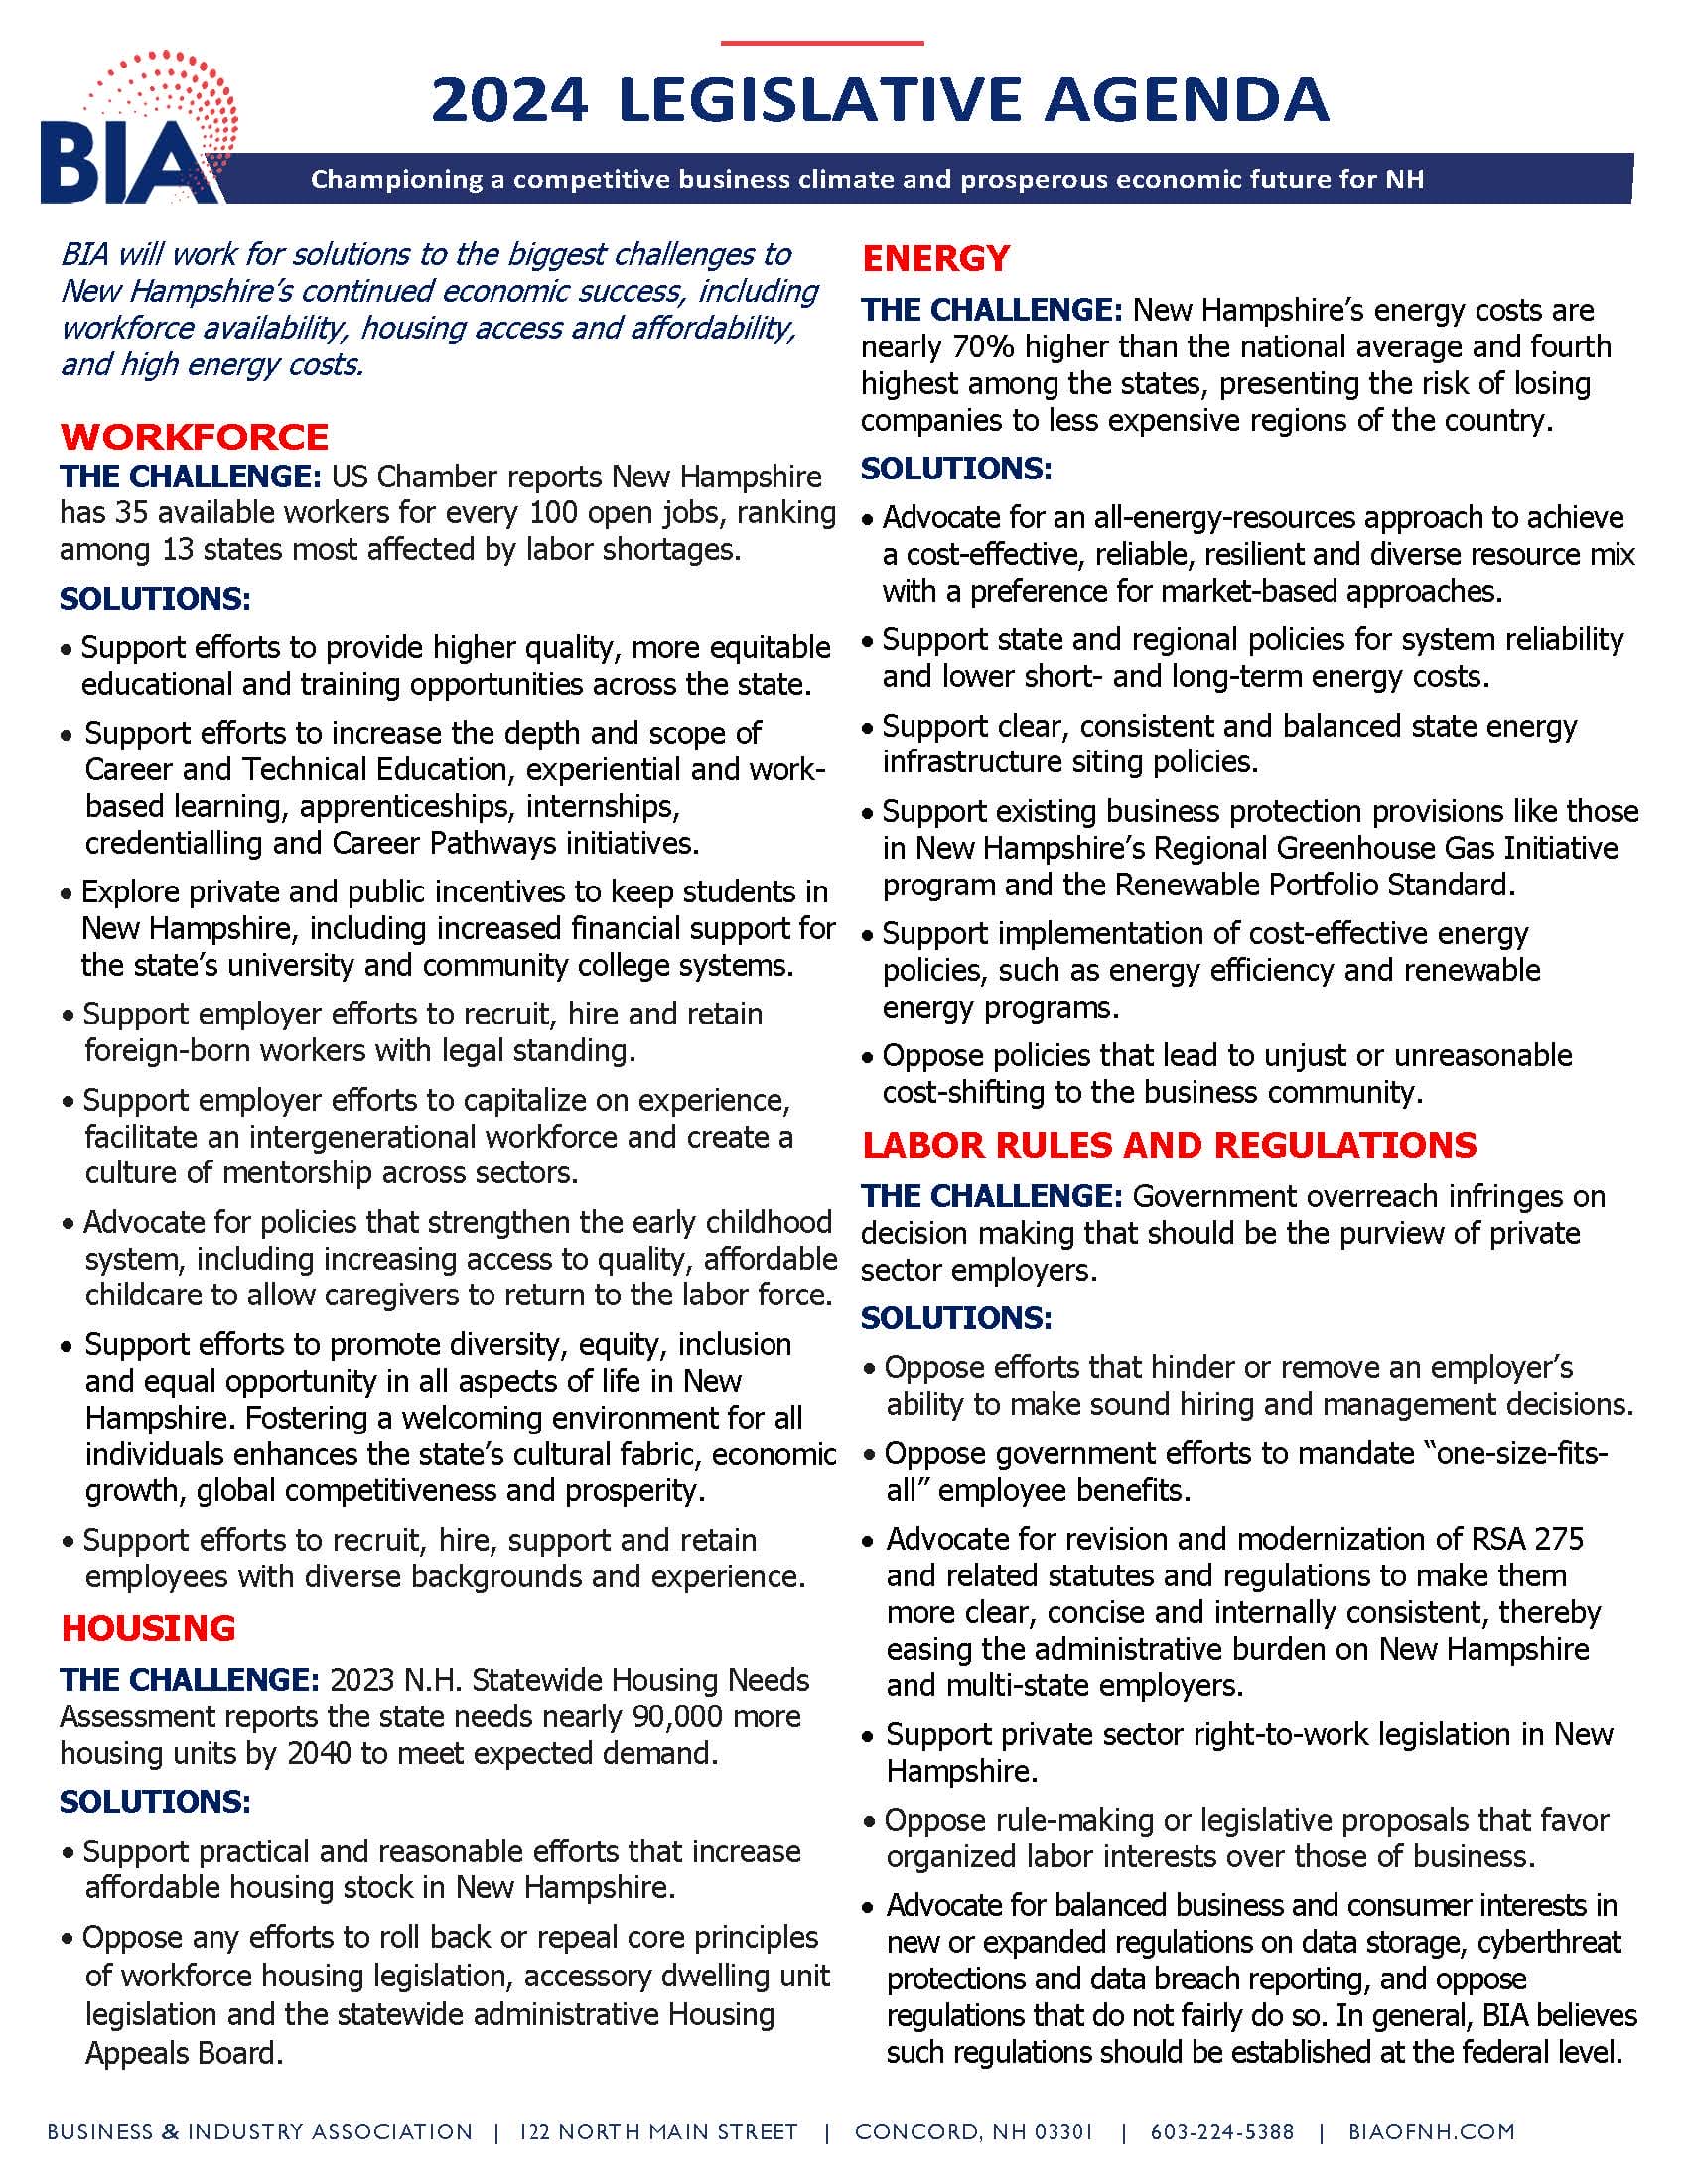 2024 Public Policy Priorities -- FINAL_Page_1